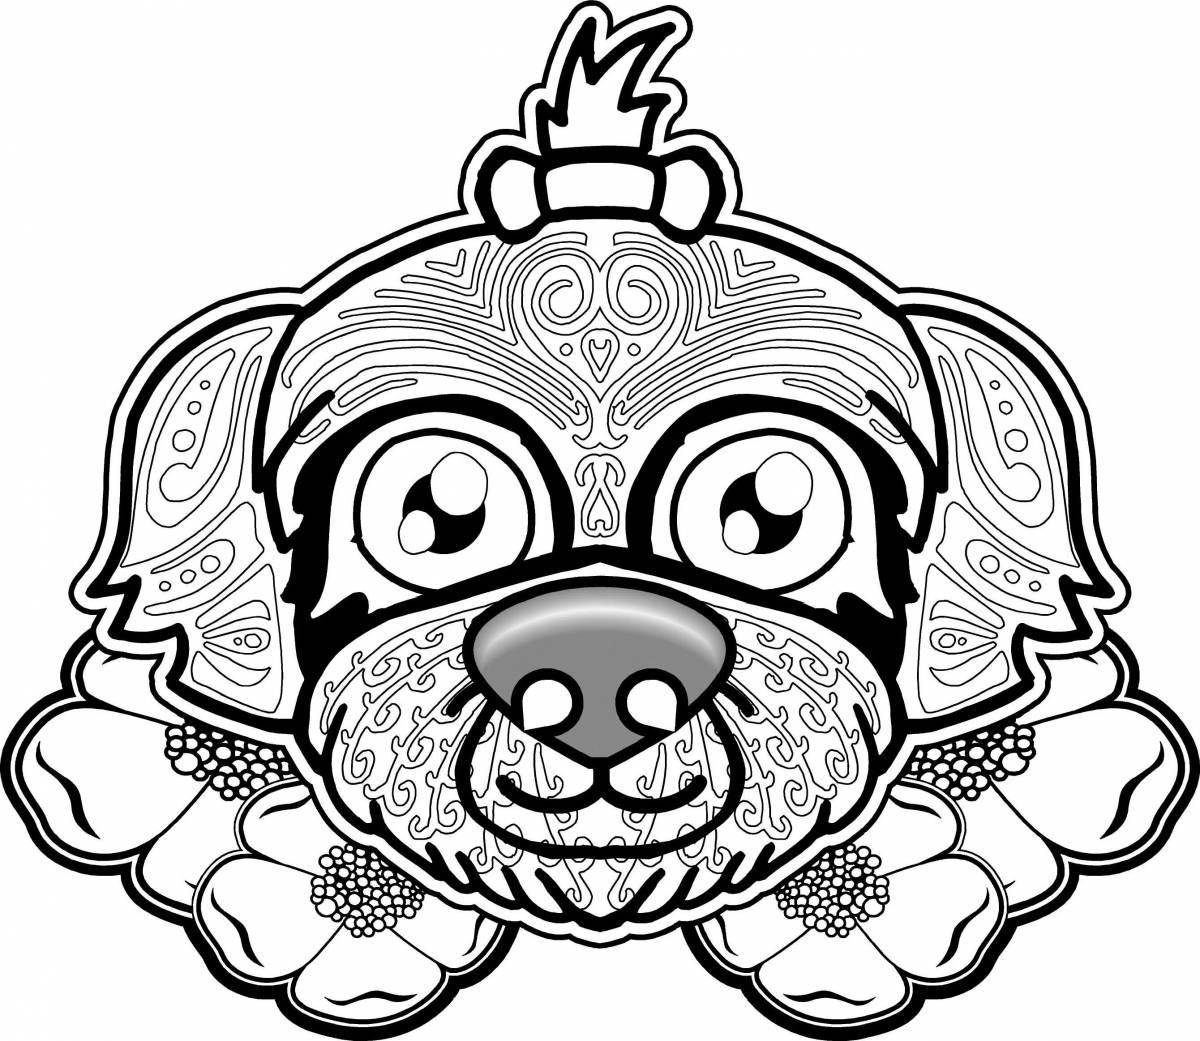 Coloring page joyful pug for the new year